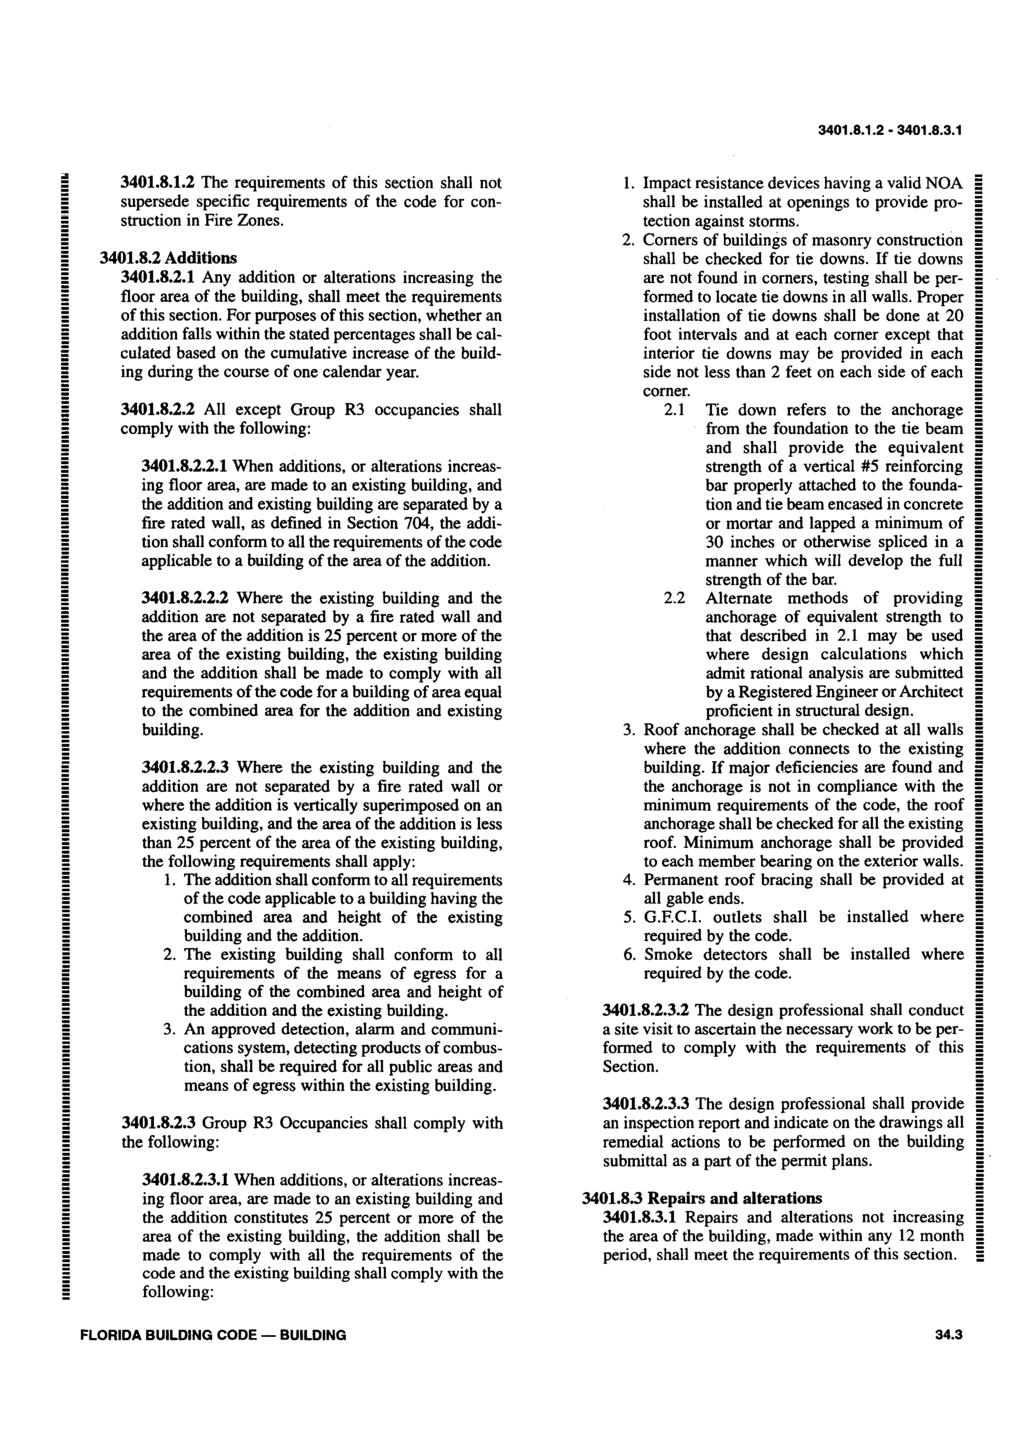 3401.8.1.2-3401.8.3.1 3401.8.1.2 The requirements of this section shall not supersede specific requirements of the code for construction in Fire Zones. 3401.8.2 Additions 3401.8.2.1 Any addition or alterations increasing the floor area of the building, shall meet the requirements of this section.